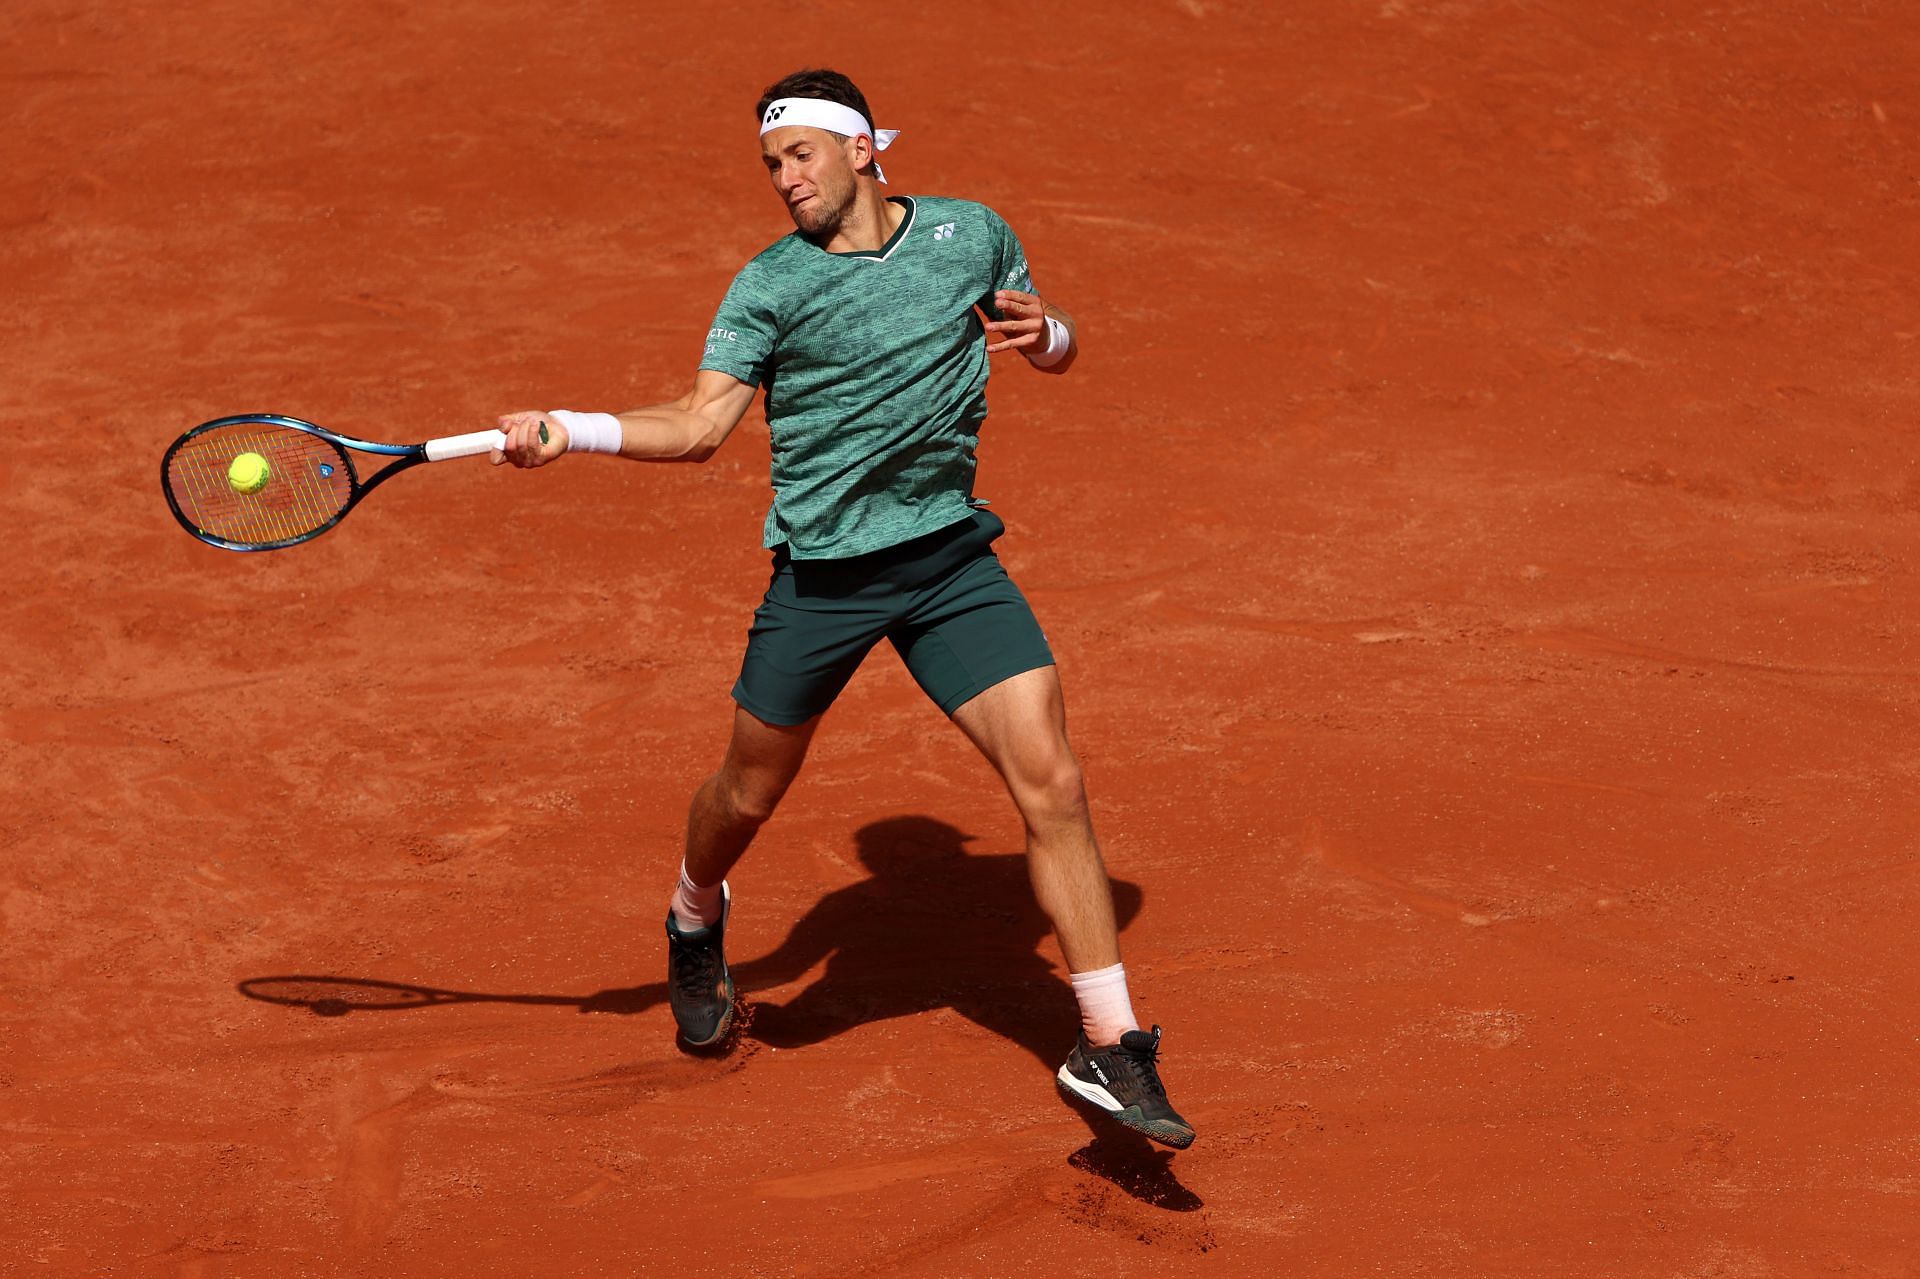 Casper Ruud at the 2022 French Open.